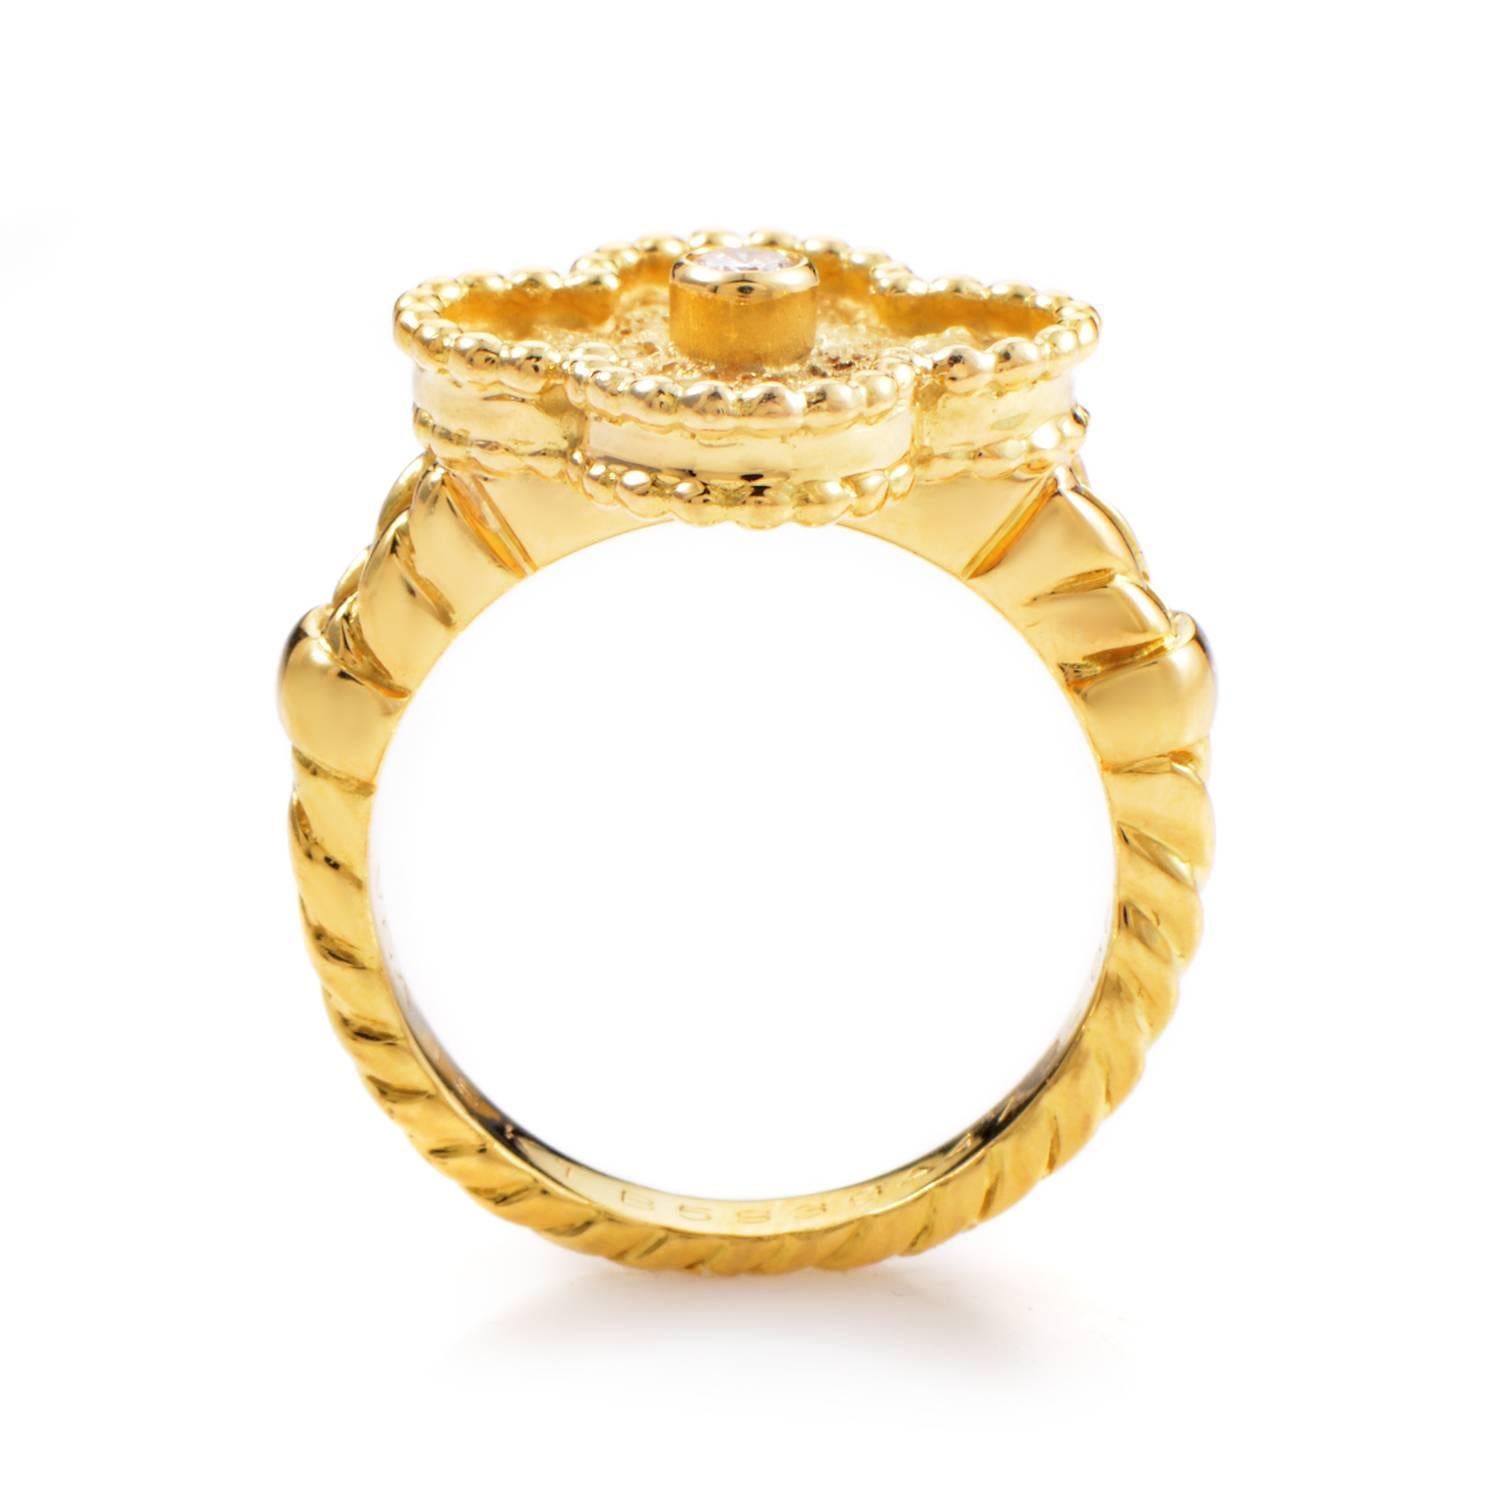 Coming from the artistic Alhambra collection designed by Van Cleef & Arpels, this extraordinary ring boasts the familiar lavish design and it’s made of regal 18K yellow gold, featuring also a 0.06ct diamond to perfectly round up the luxurious